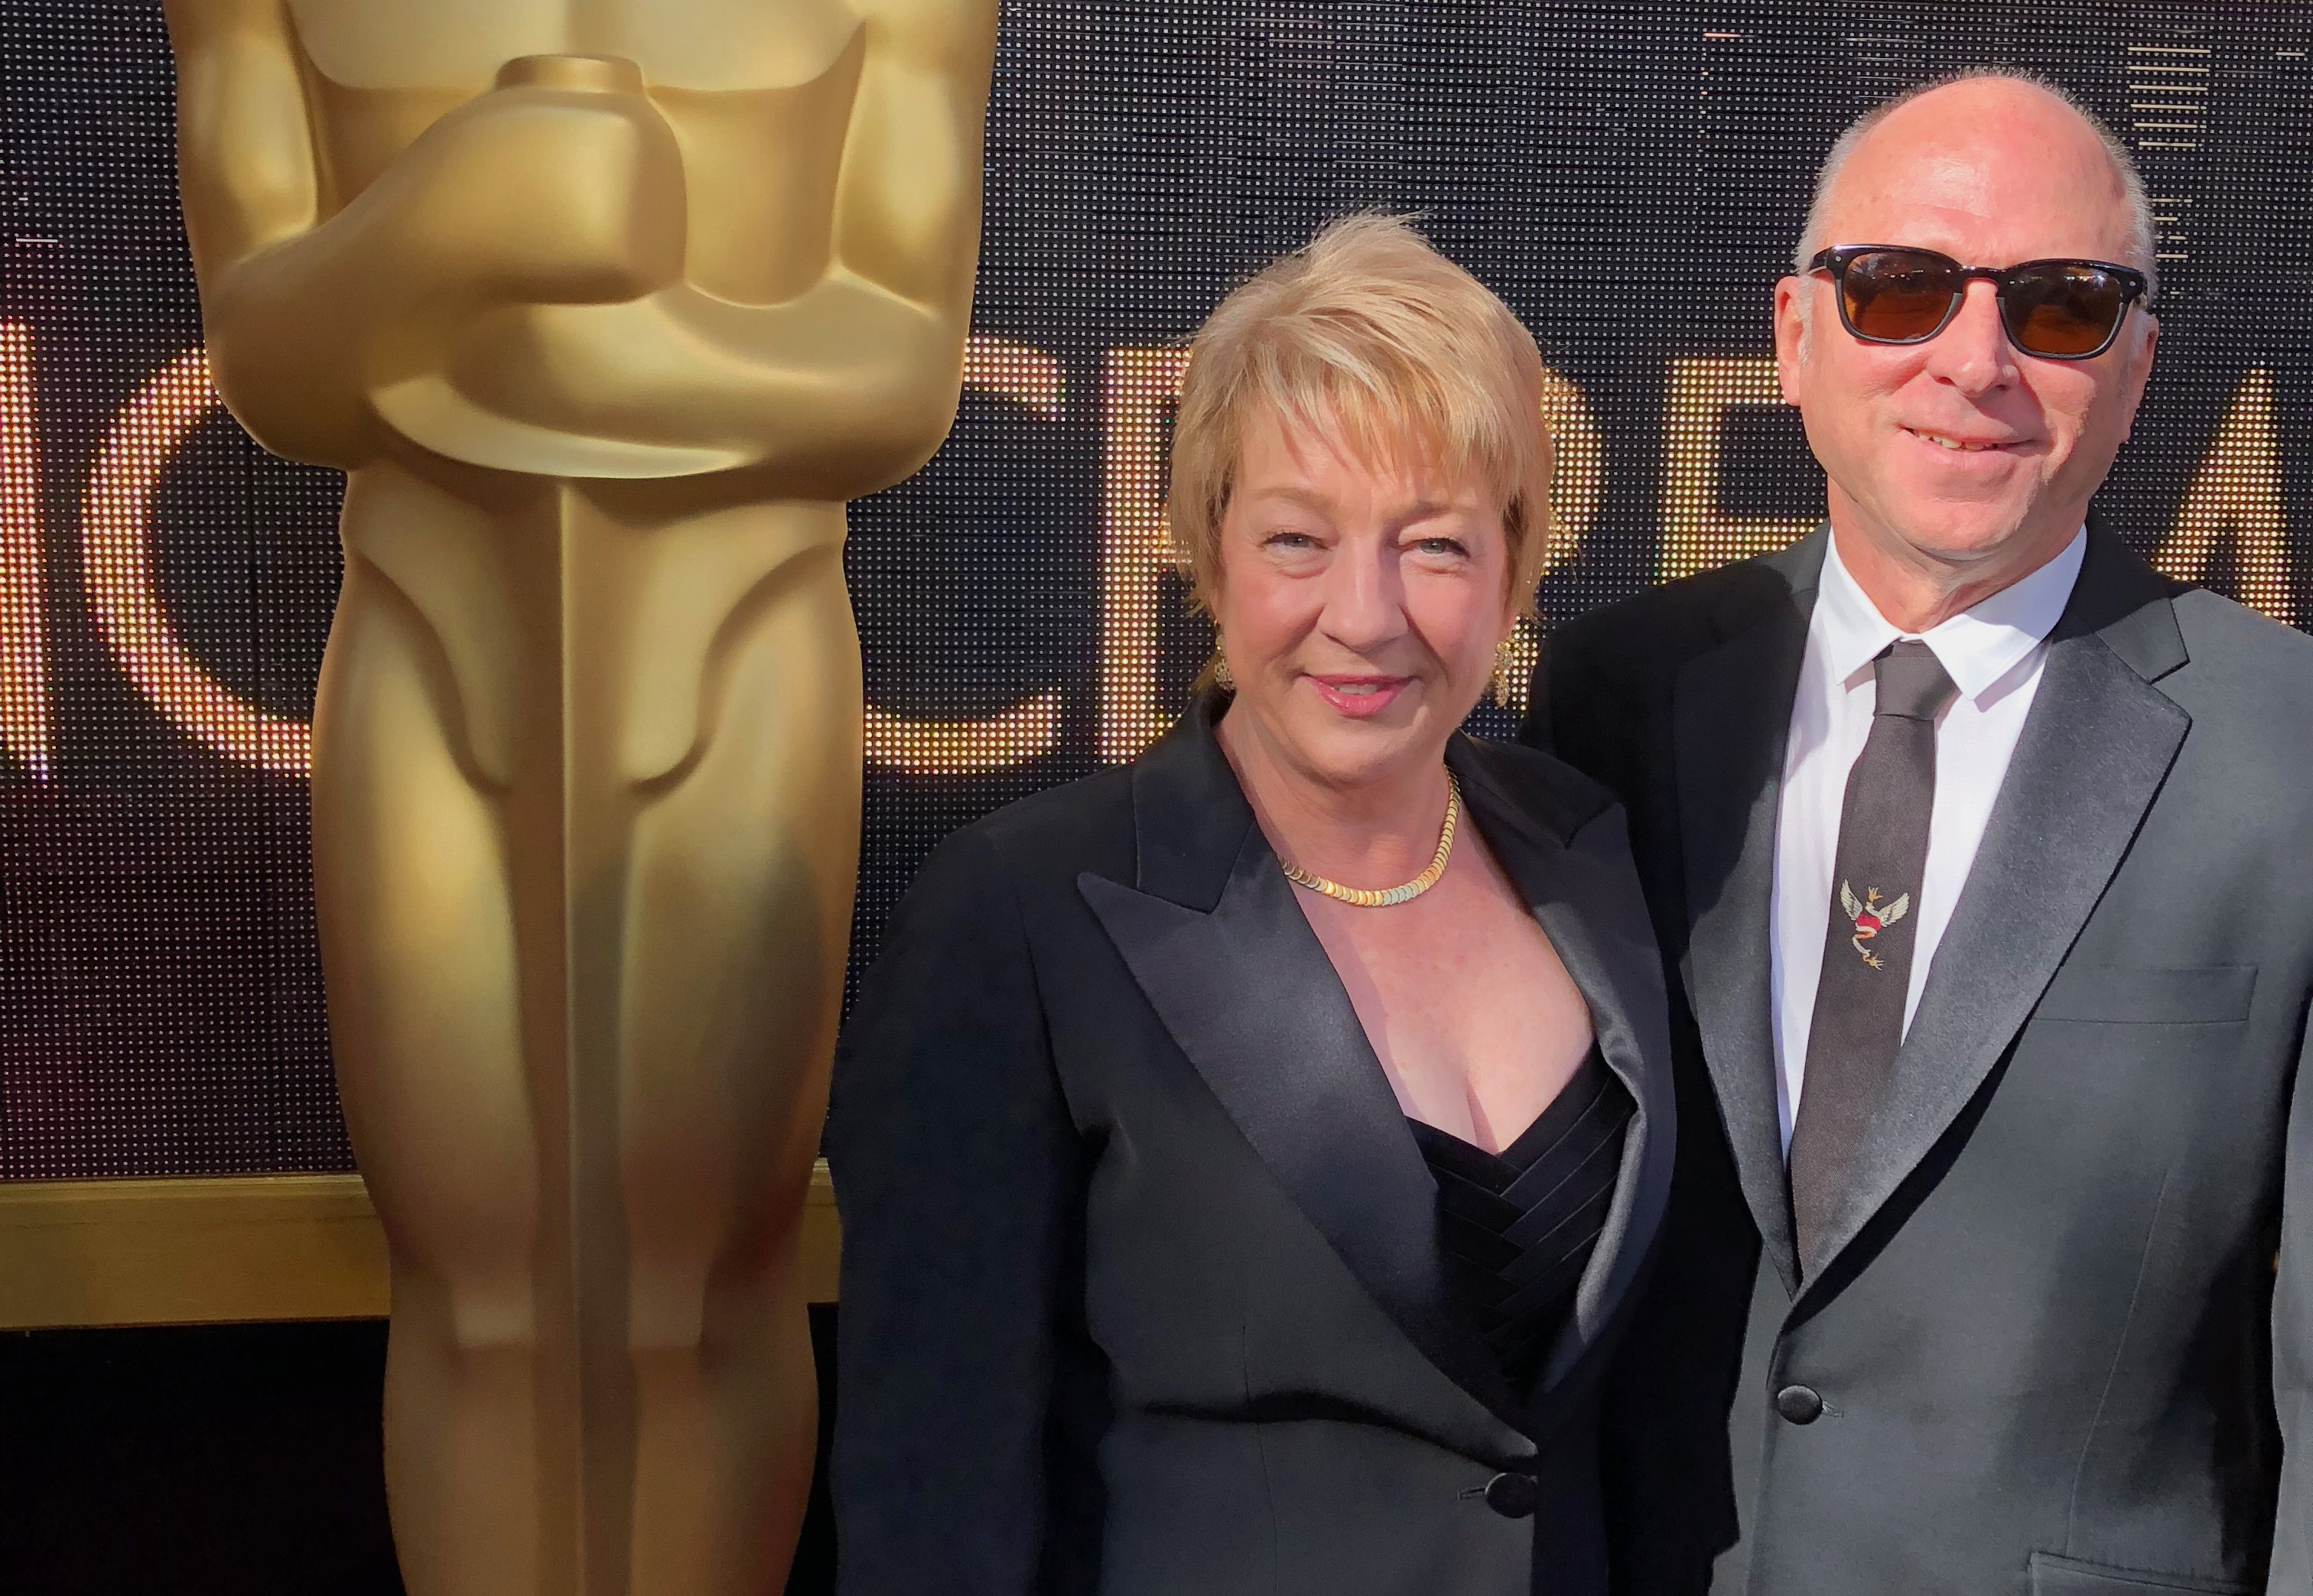 Bob Berney (right) and his wife Jeanne (left) at the Oscars.